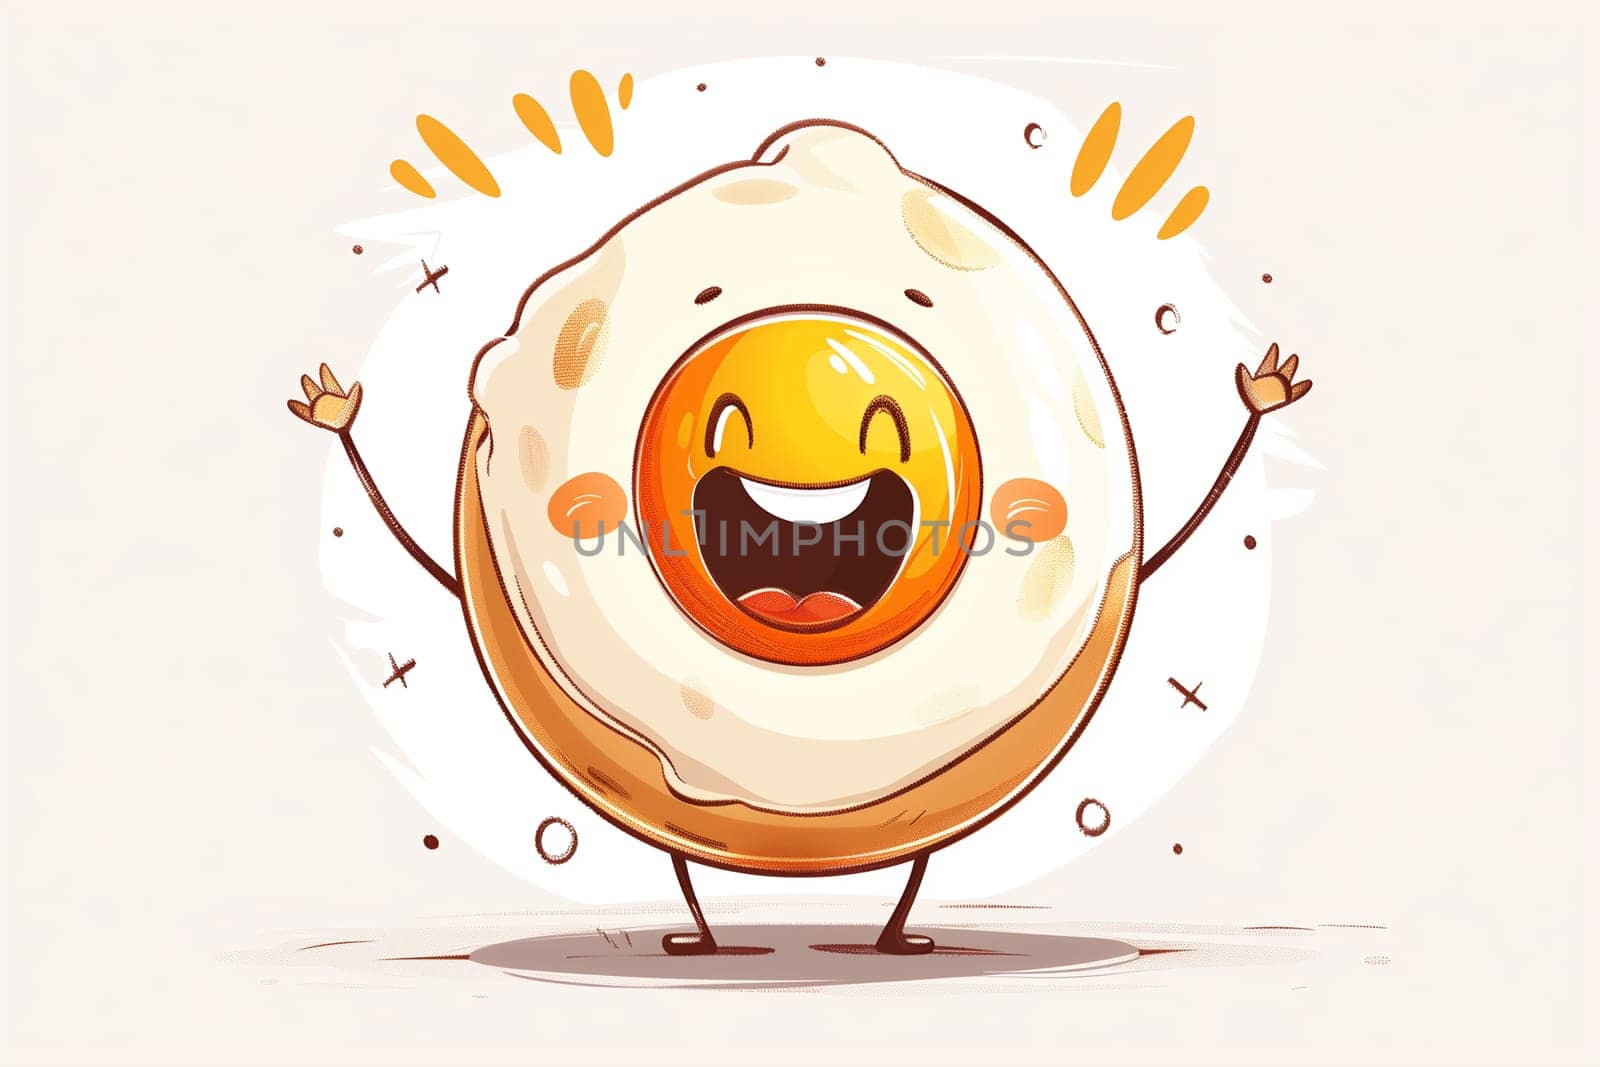 An illustration of a fried egg character with a big smile and waving arms. It is drawn in a cartoon style.